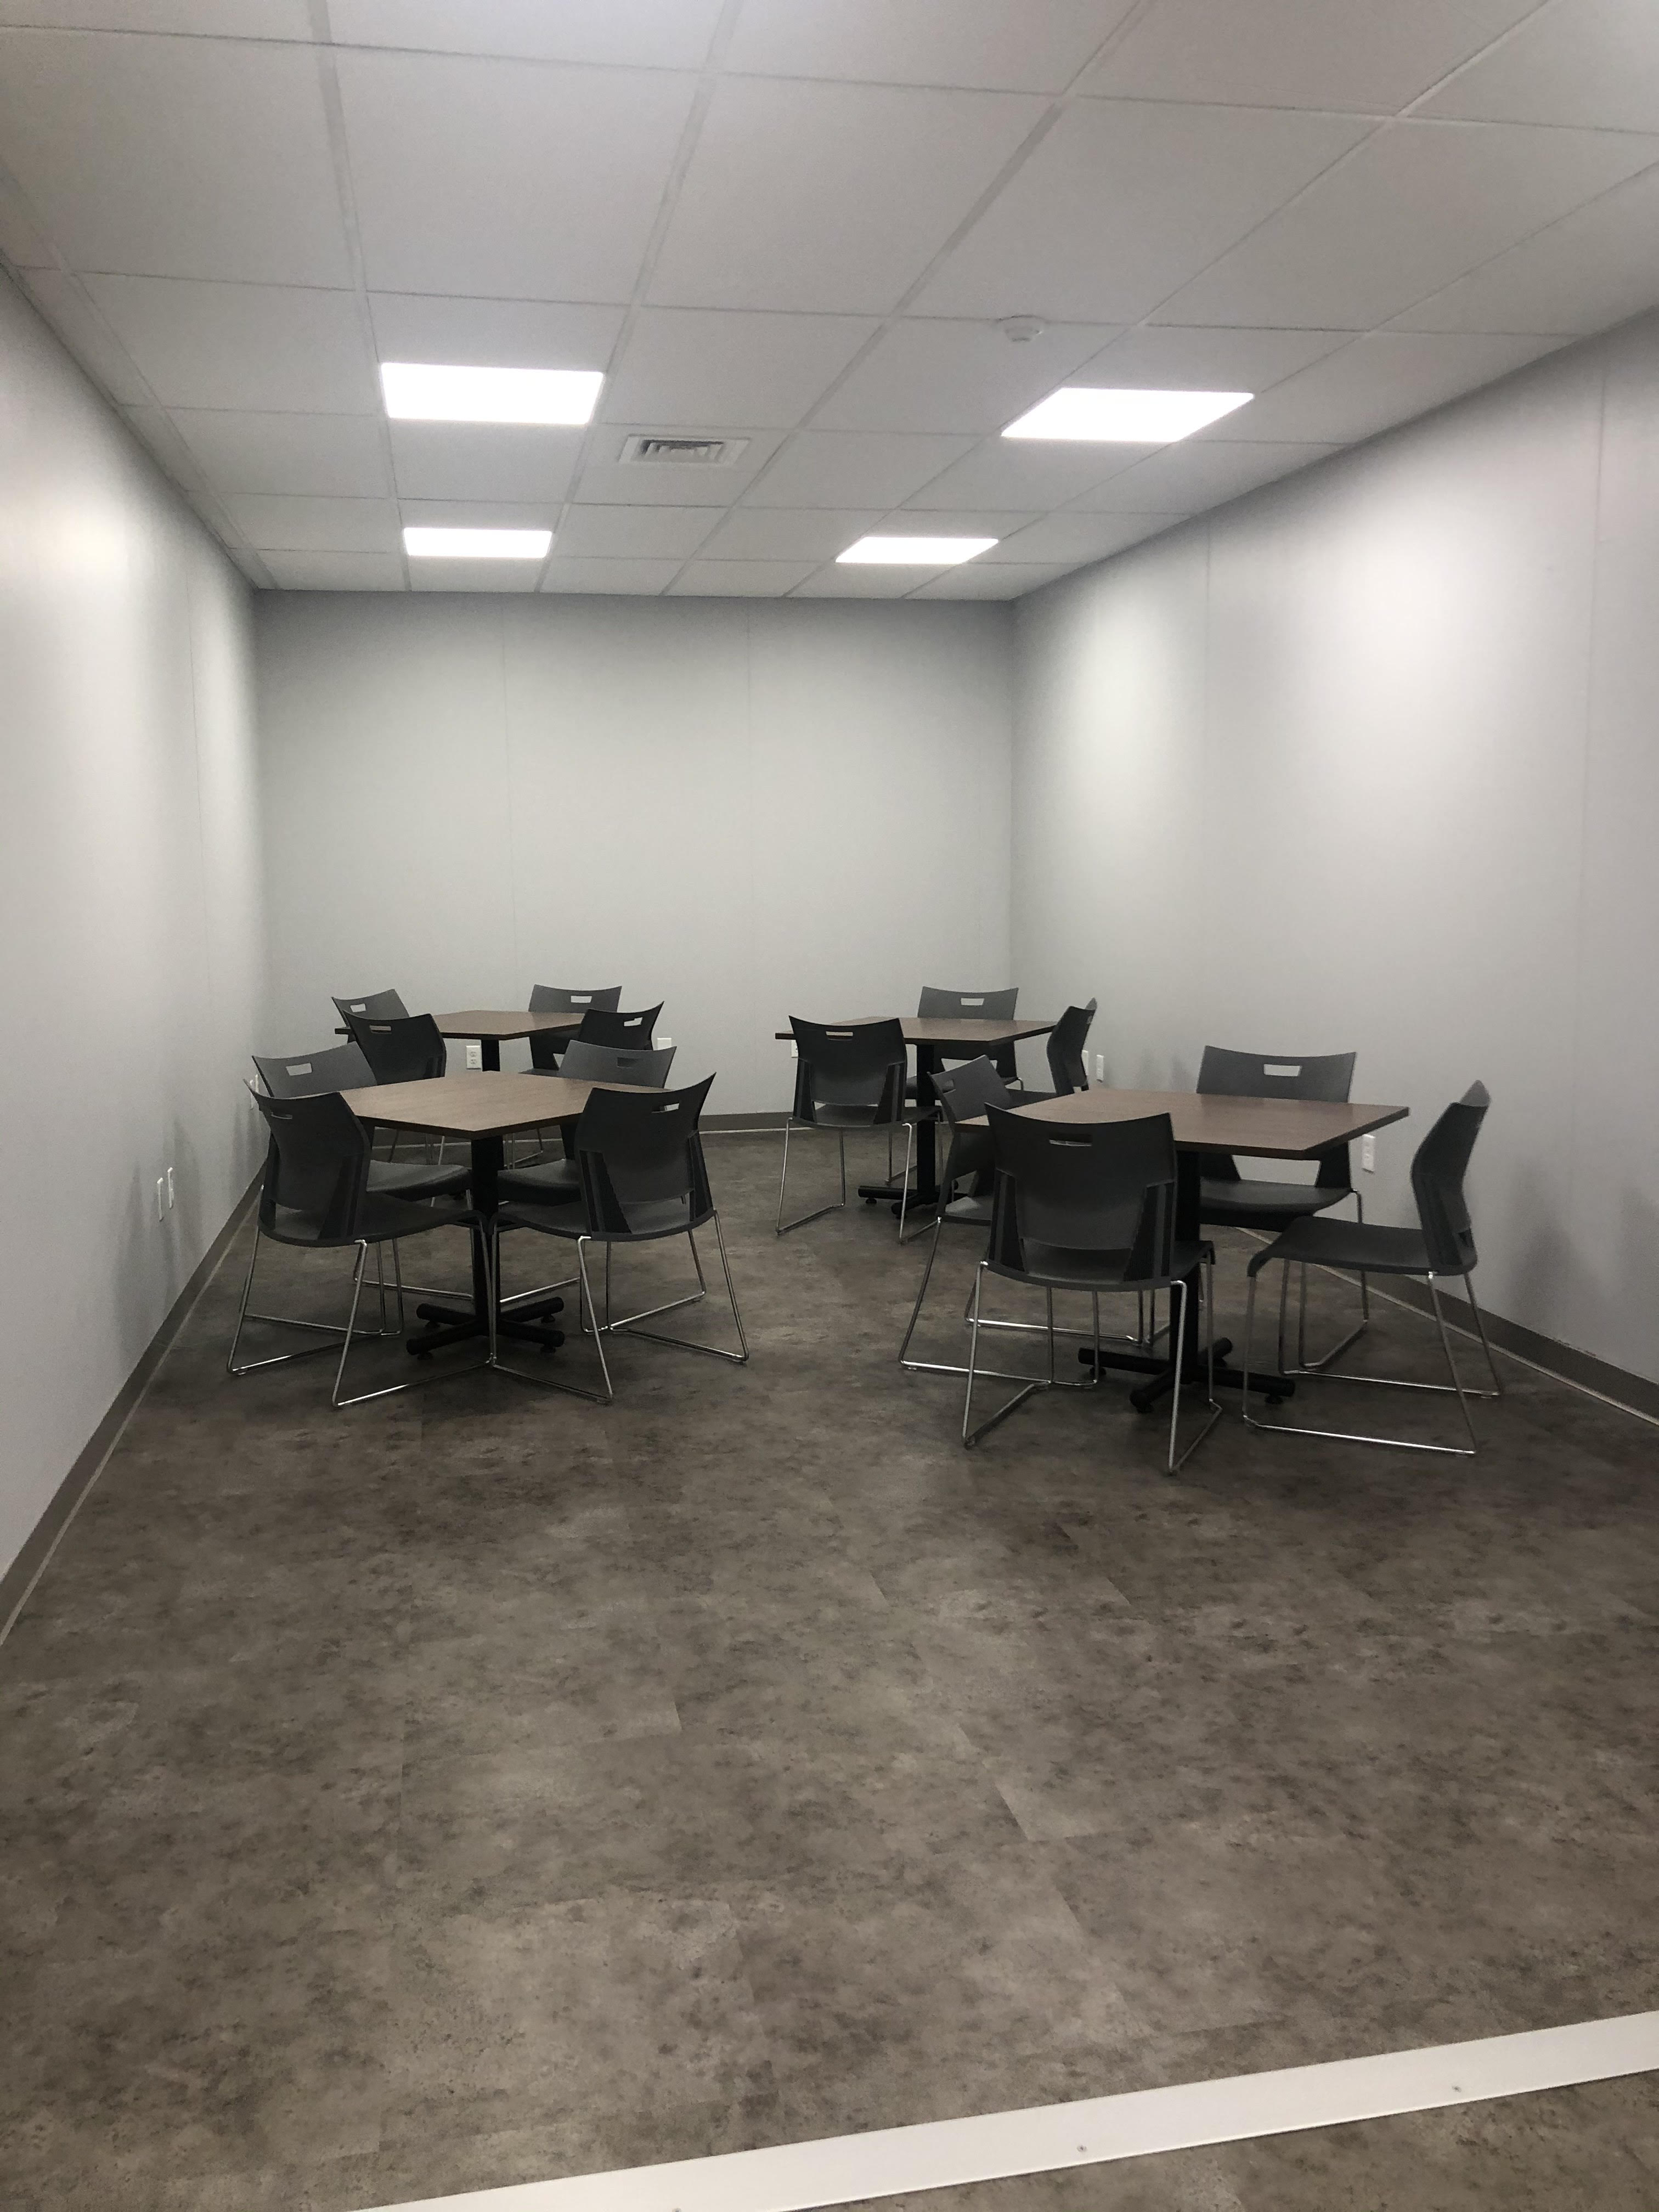 DRIVE Professional Building Lunch Room Seating